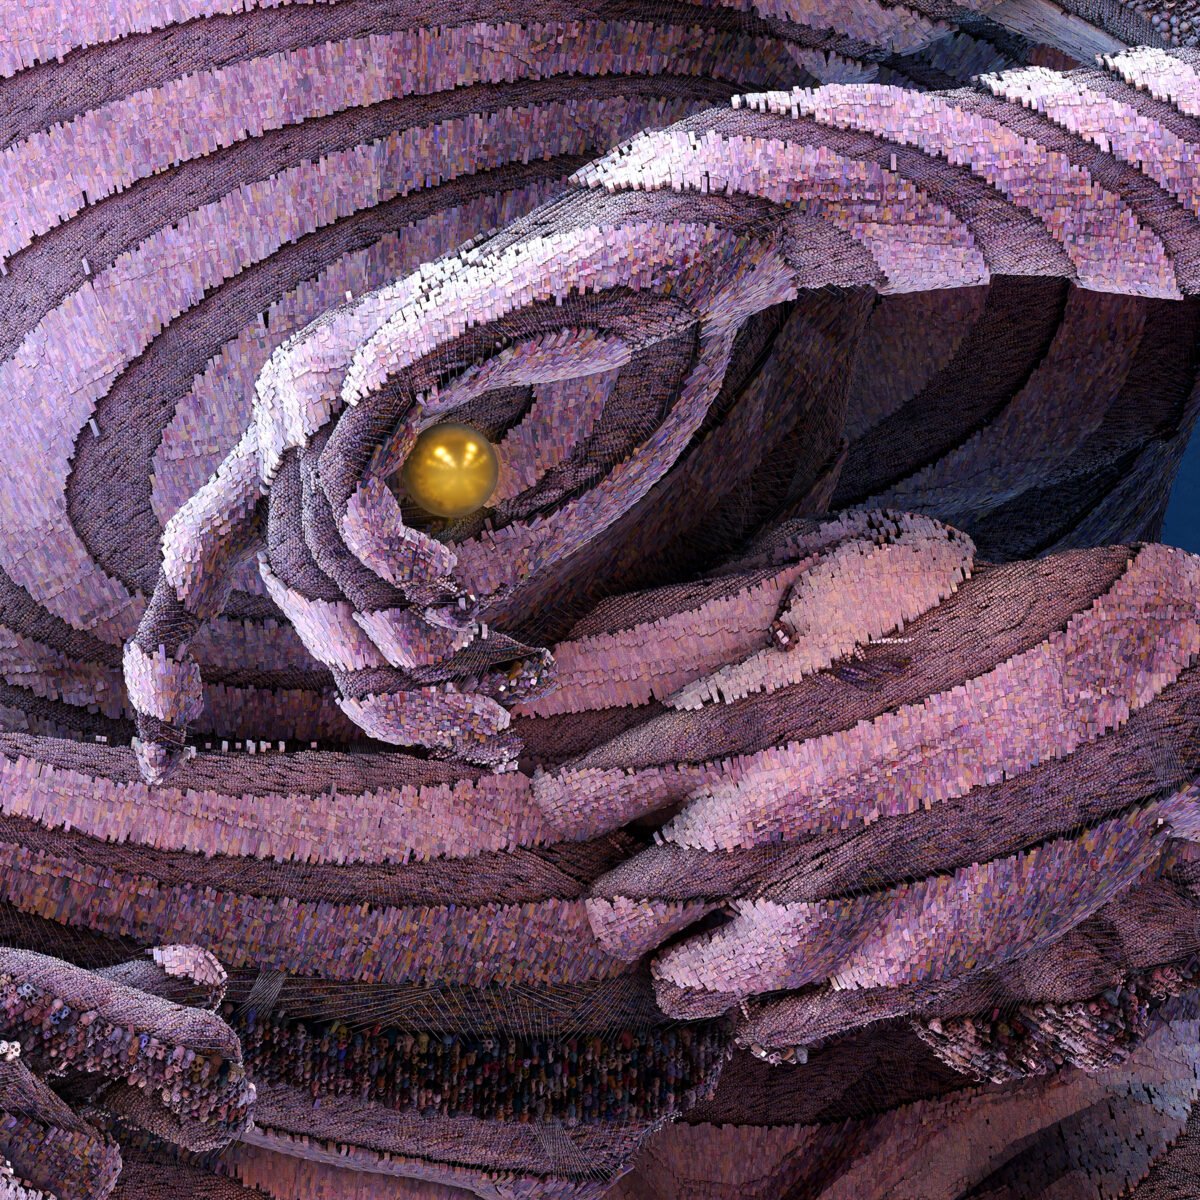 Image with purple waved tones. Voices whisper to the man while he hides the golden ball. On left hand sitting small woman figure.